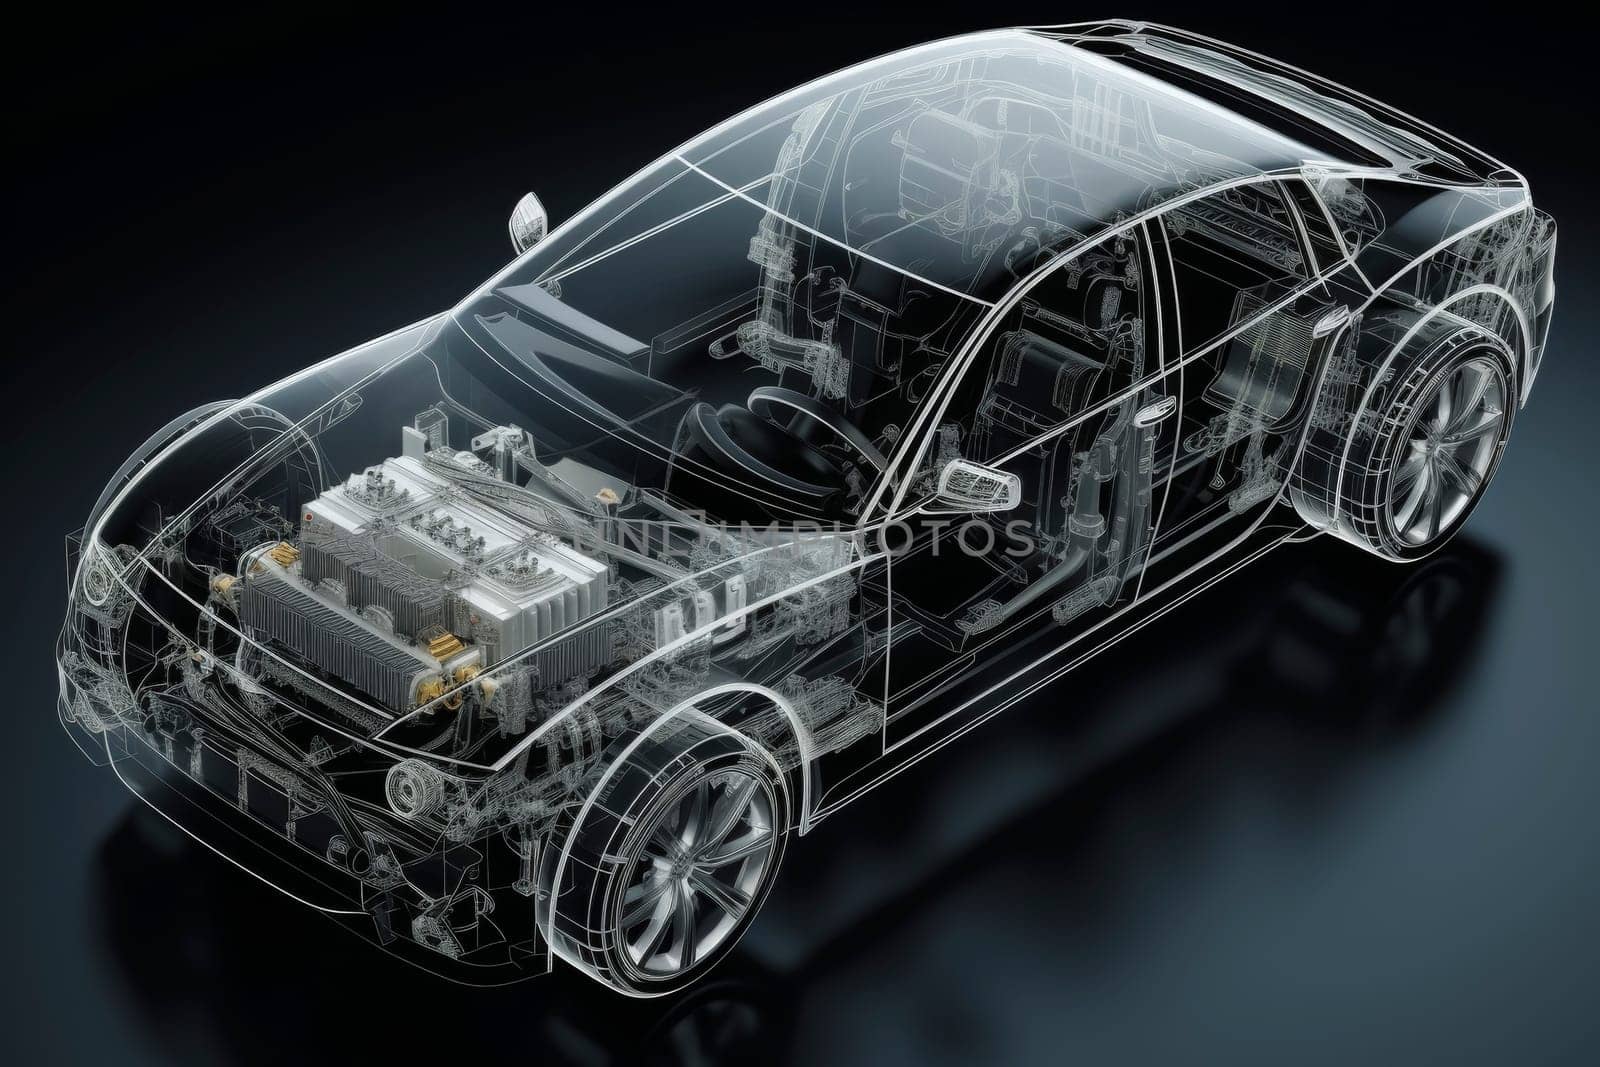 A high-resolution image displaying a transparent car model revealing intricate internal components and engineering details.